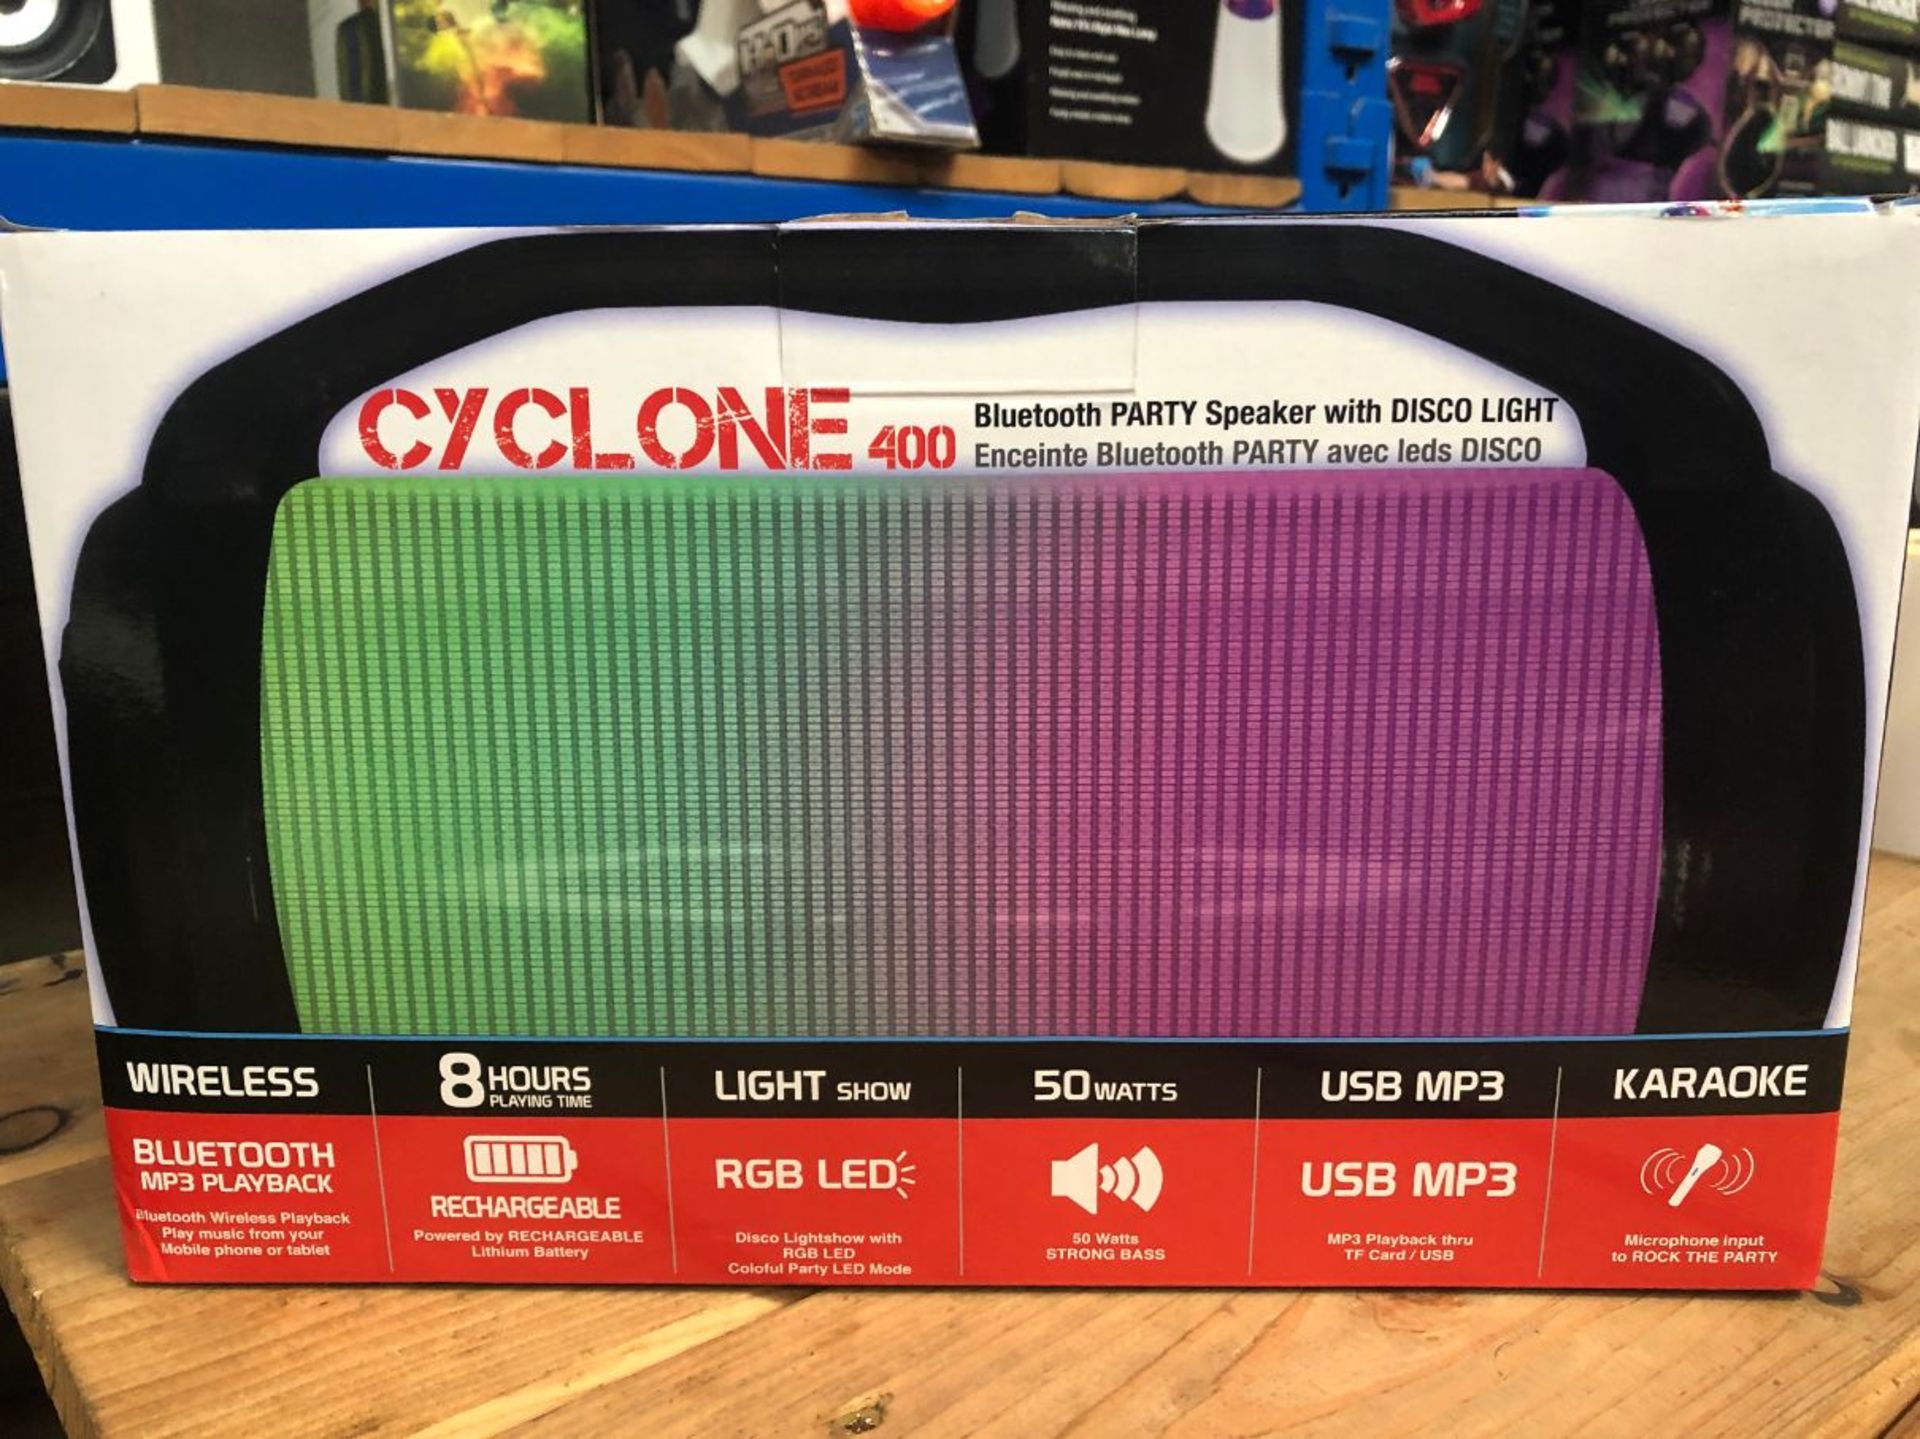 2 X IDANCE CYCLONE LED BLUETOOTH SPEAKERS - CYCLONE 400 / COMBINED RRP £60.00 / UNTESTED CUSTOMER